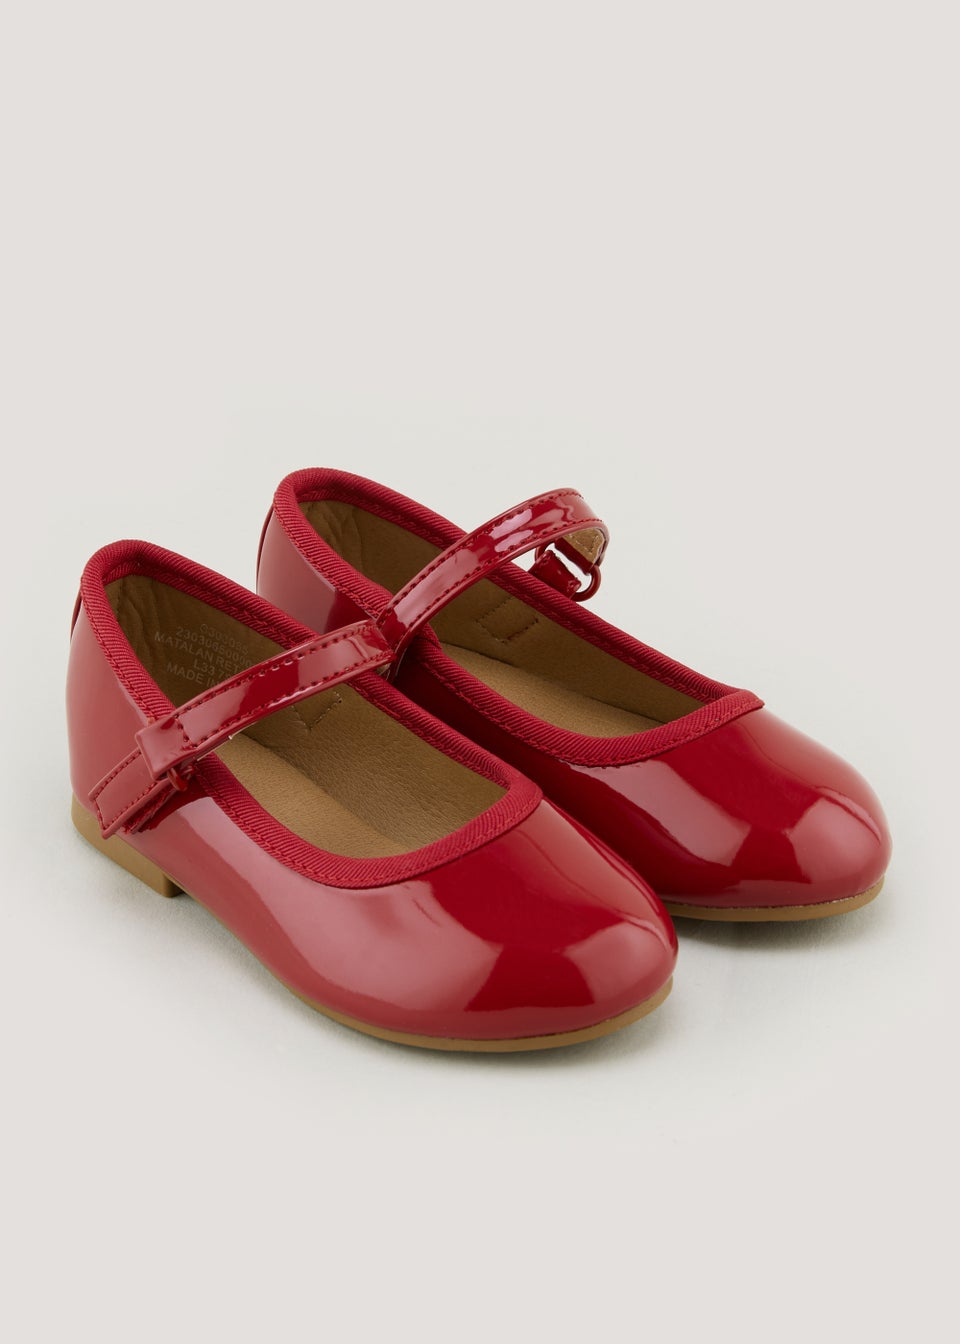 Women's Chain Decor Flat Shoes Fashion Slip On Red Work - Temu-totobed.com.vn